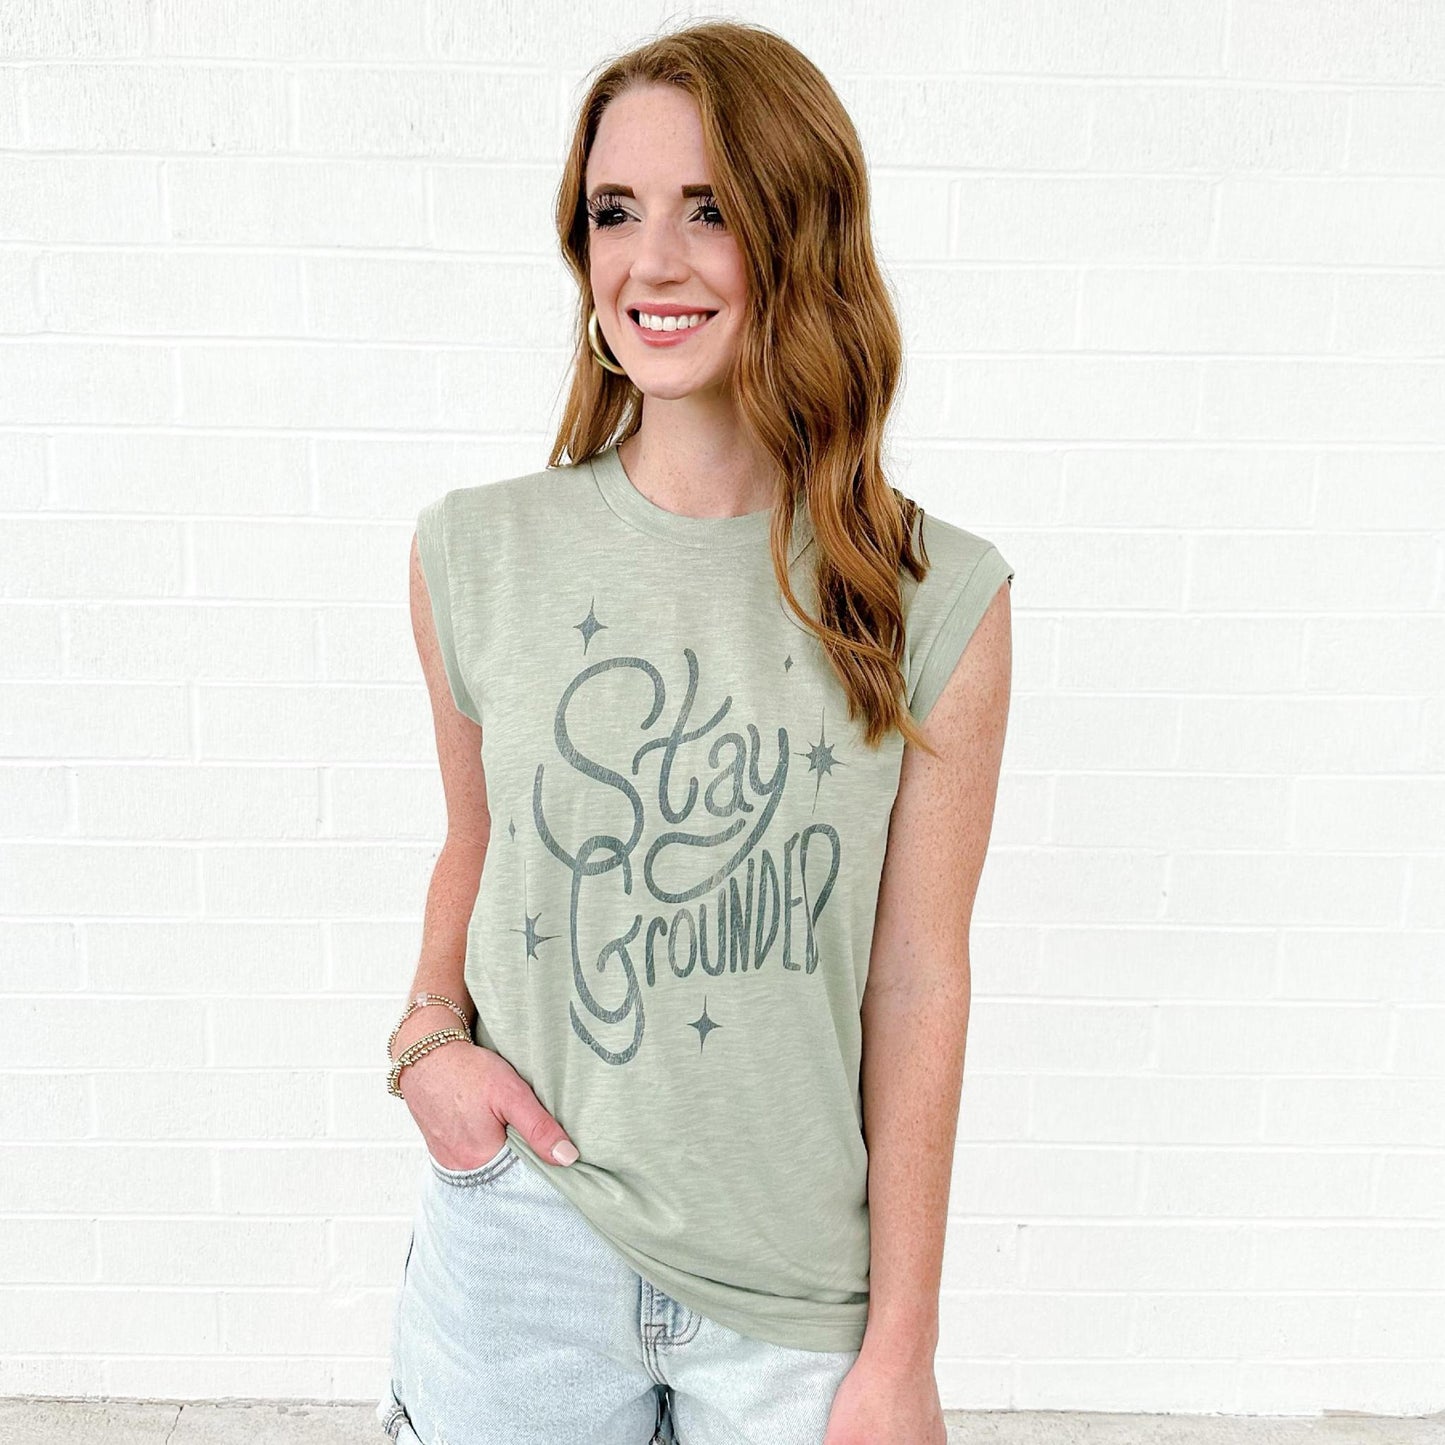 Stay Grounded Graphic Tee